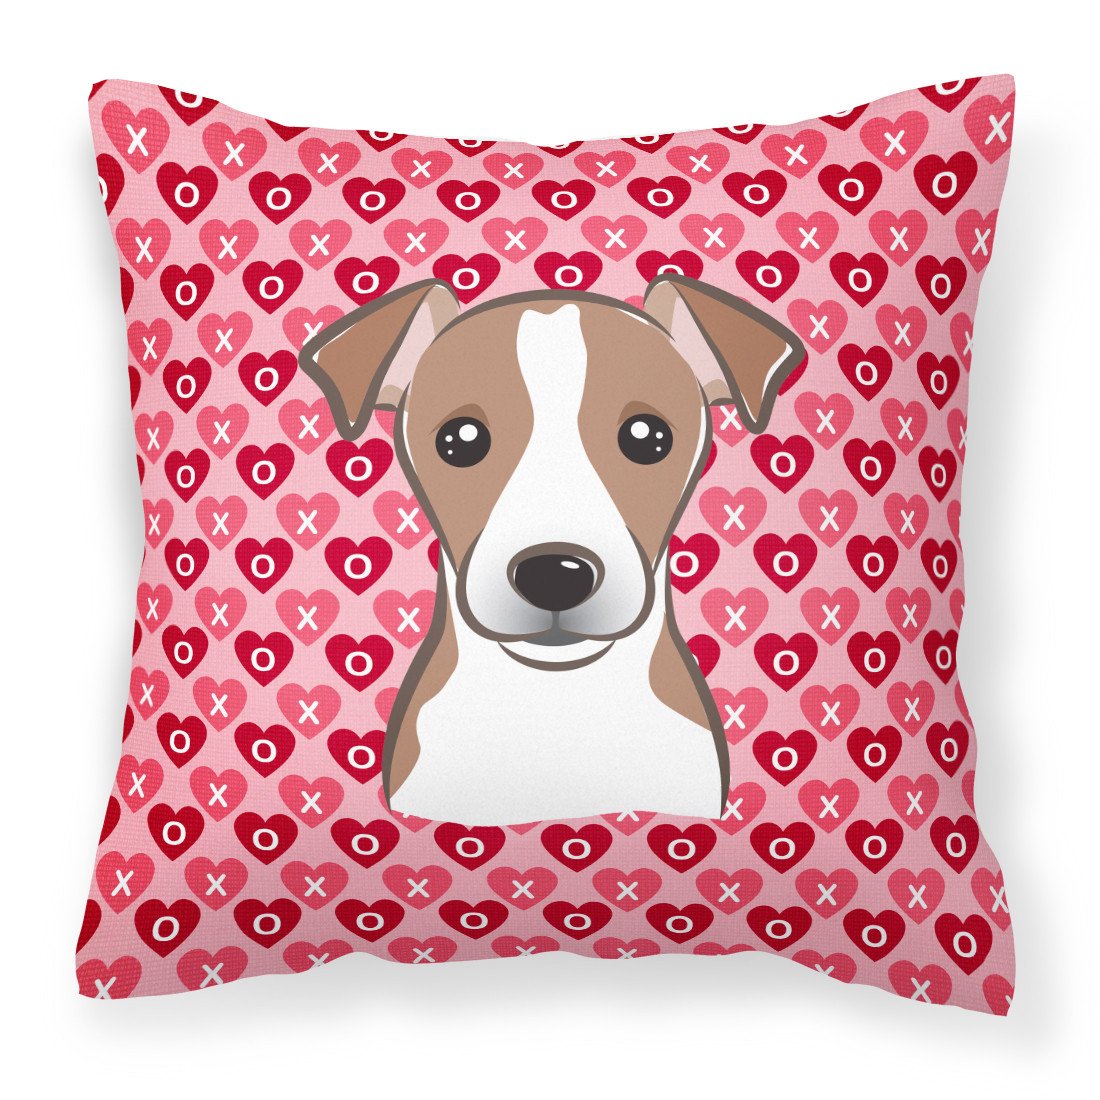 Jack Russell Terrier Hearts Fabric Decorative Pillow BB5330PW1818 by Caroline's Treasures